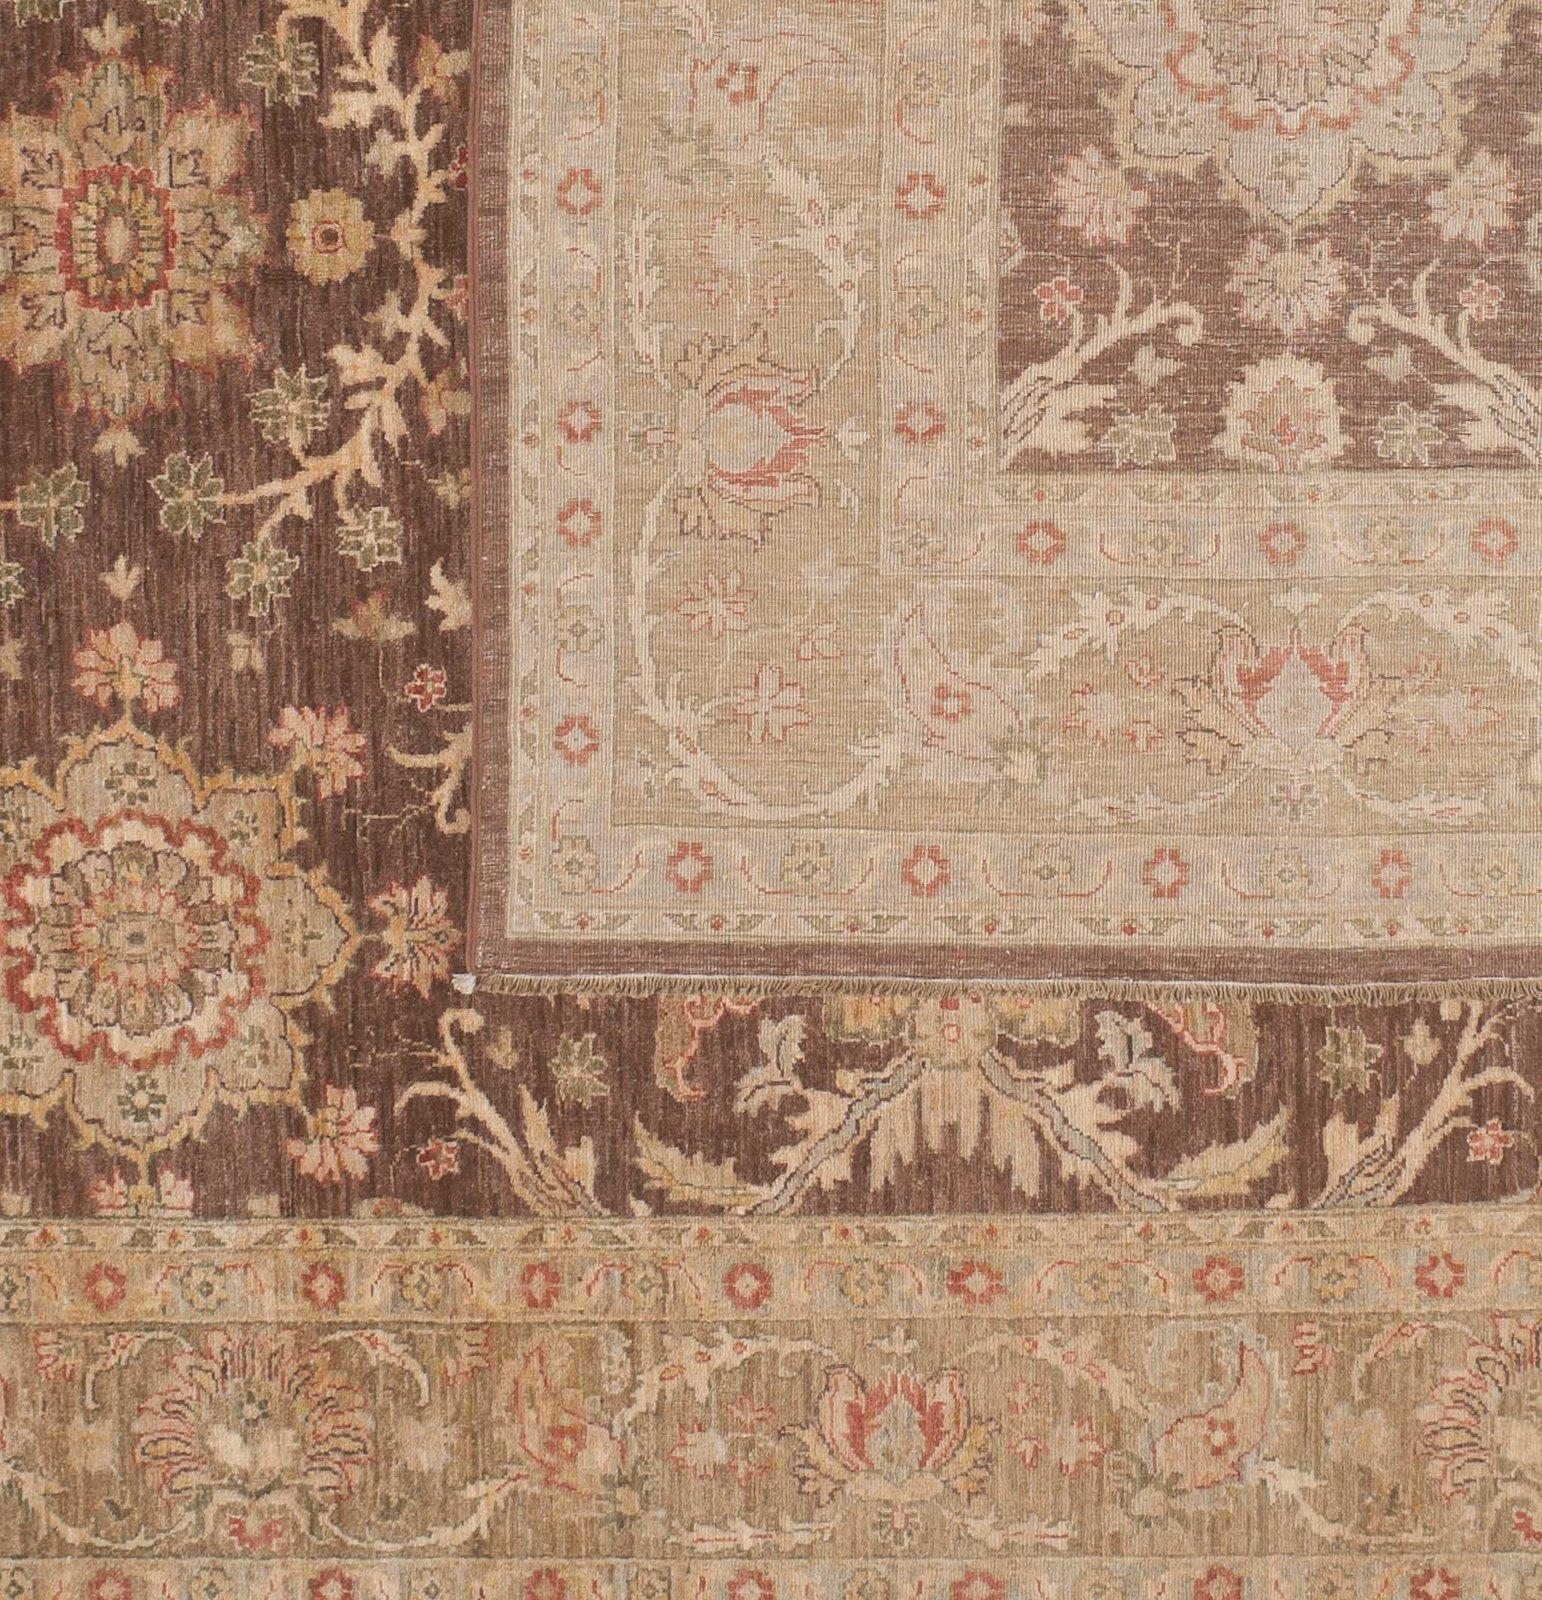 The floral elements of this traditional Pakistani design come to life with a mix of bright medallions, blossoms and scrolling vines. Brown and beige background with light blue, yellow and red. Wool. Hand knotted in Pakistan using vegetal designs.